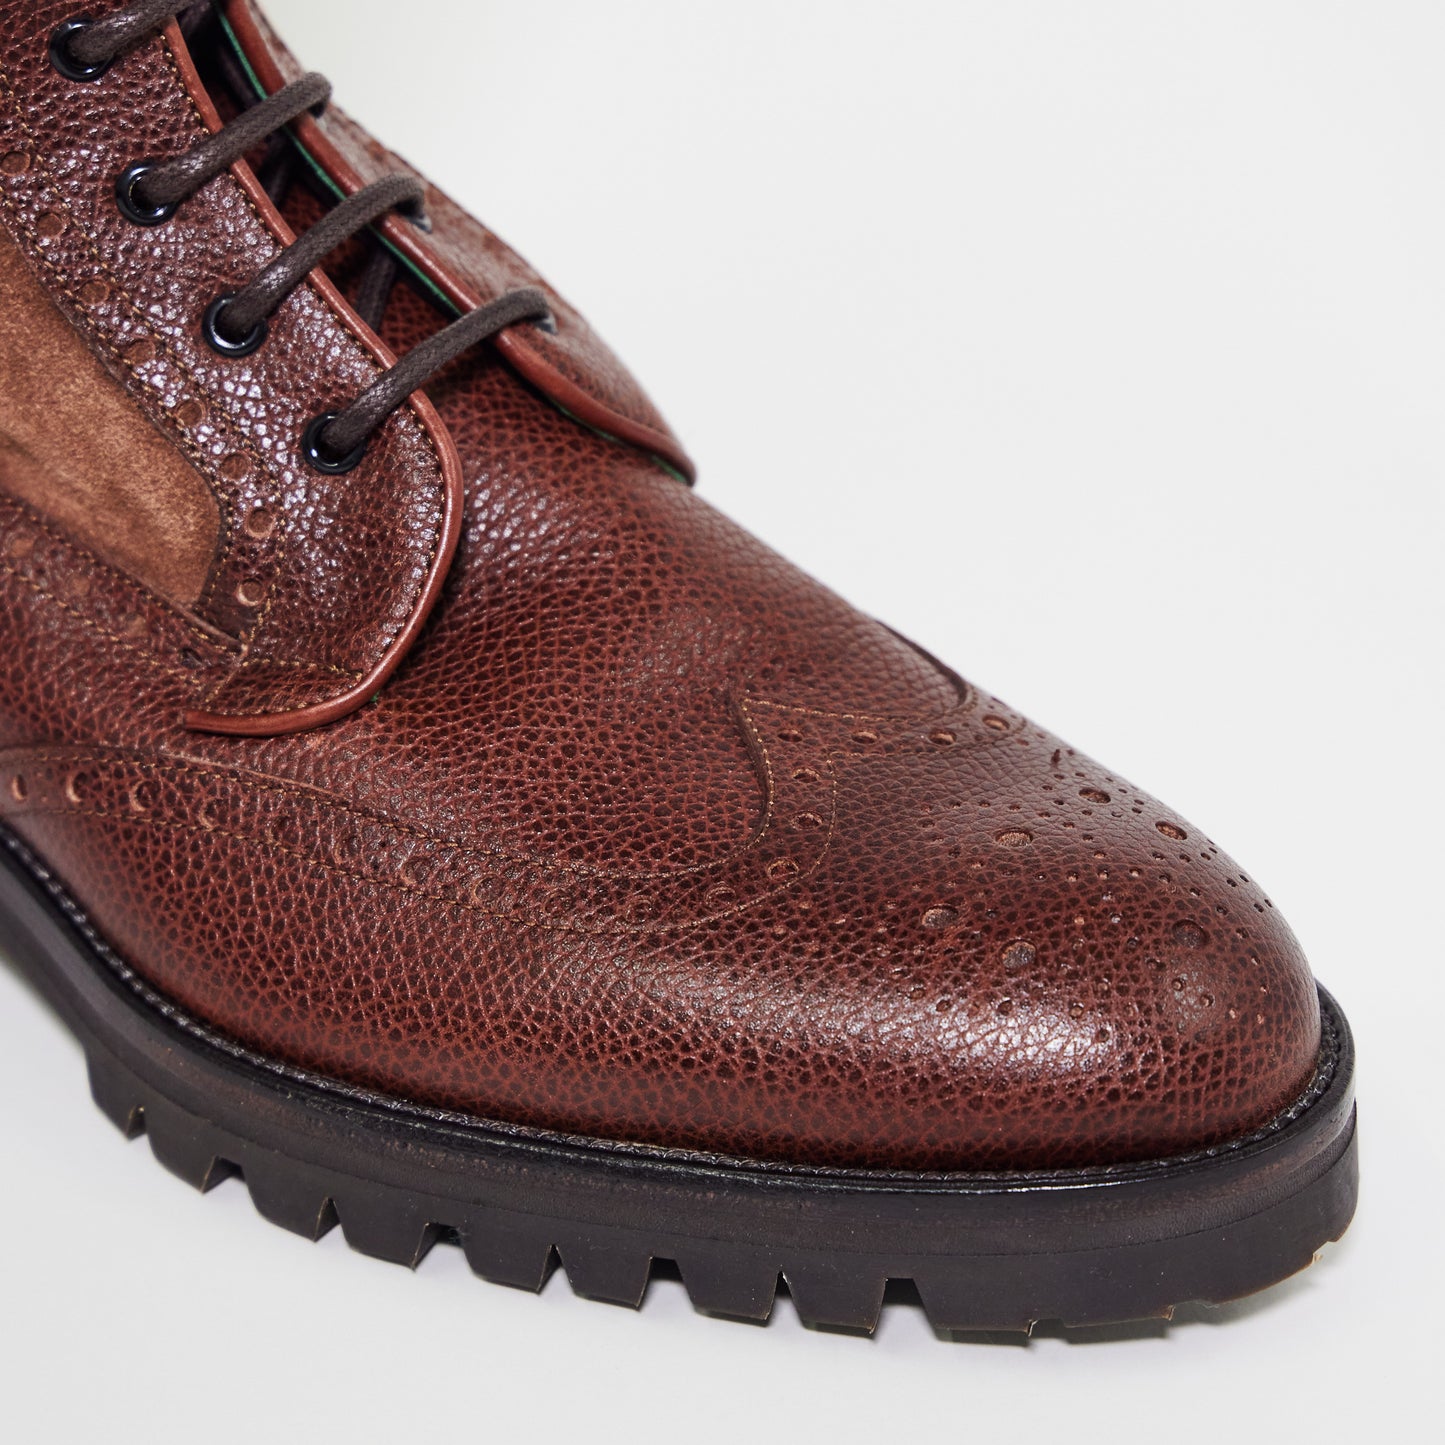 Wingtip Leather Boot in Suede Walnut